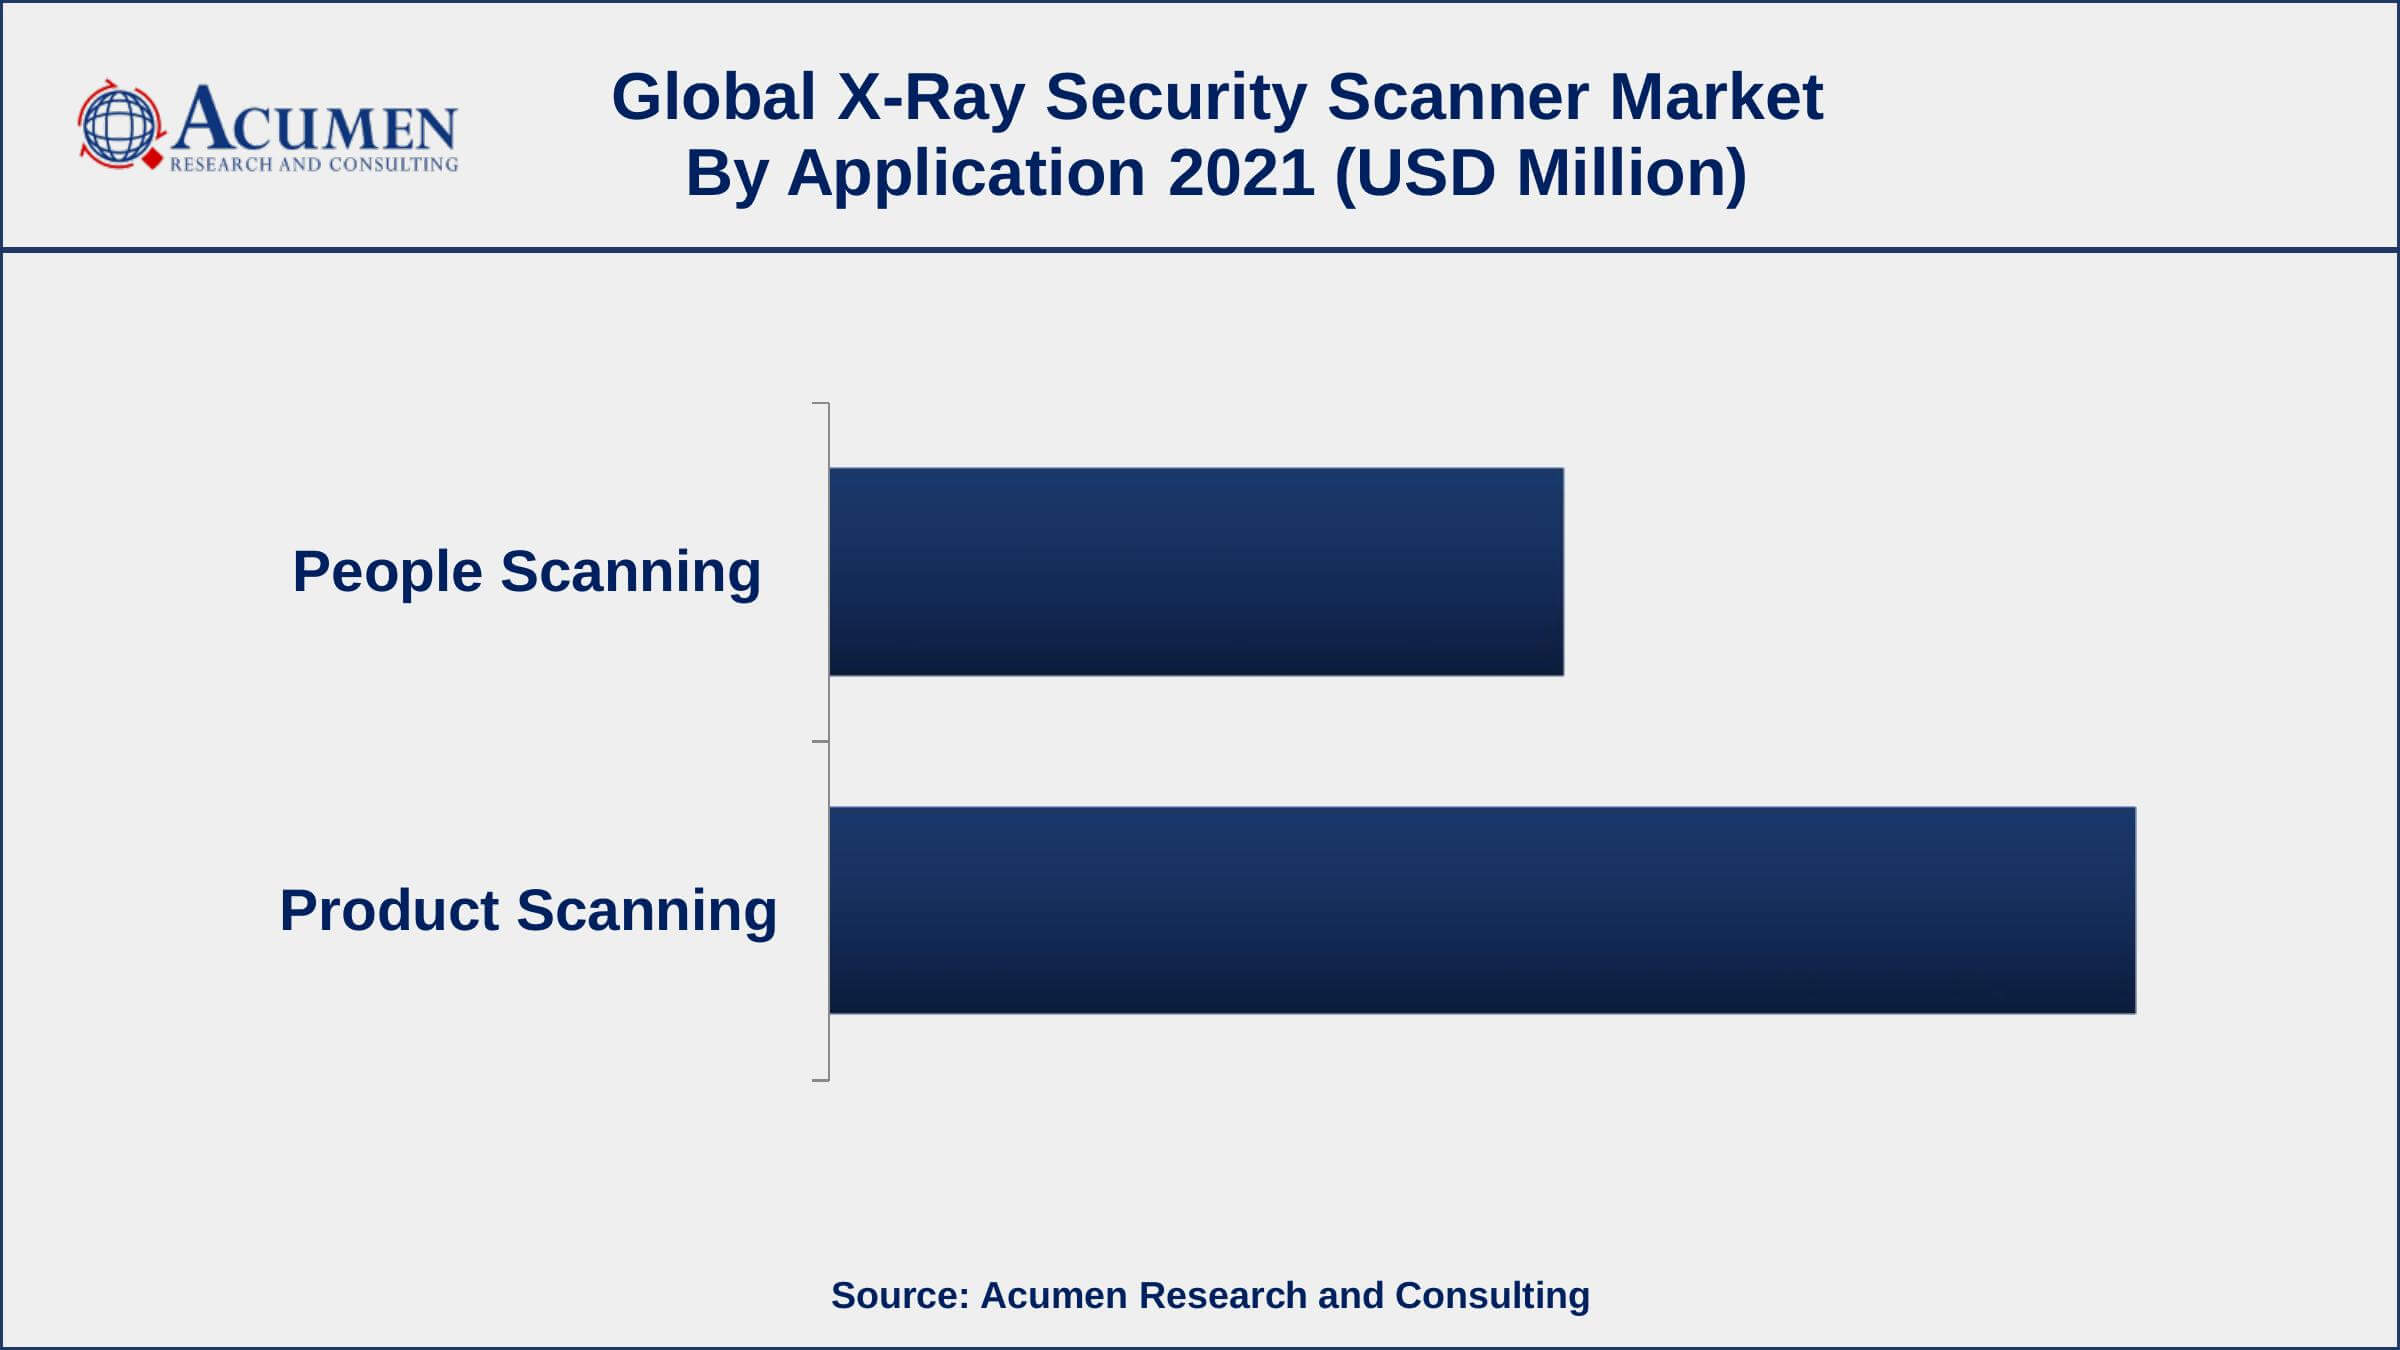 By application, product scanning segment engaged more than 64% of the total market share in 2021